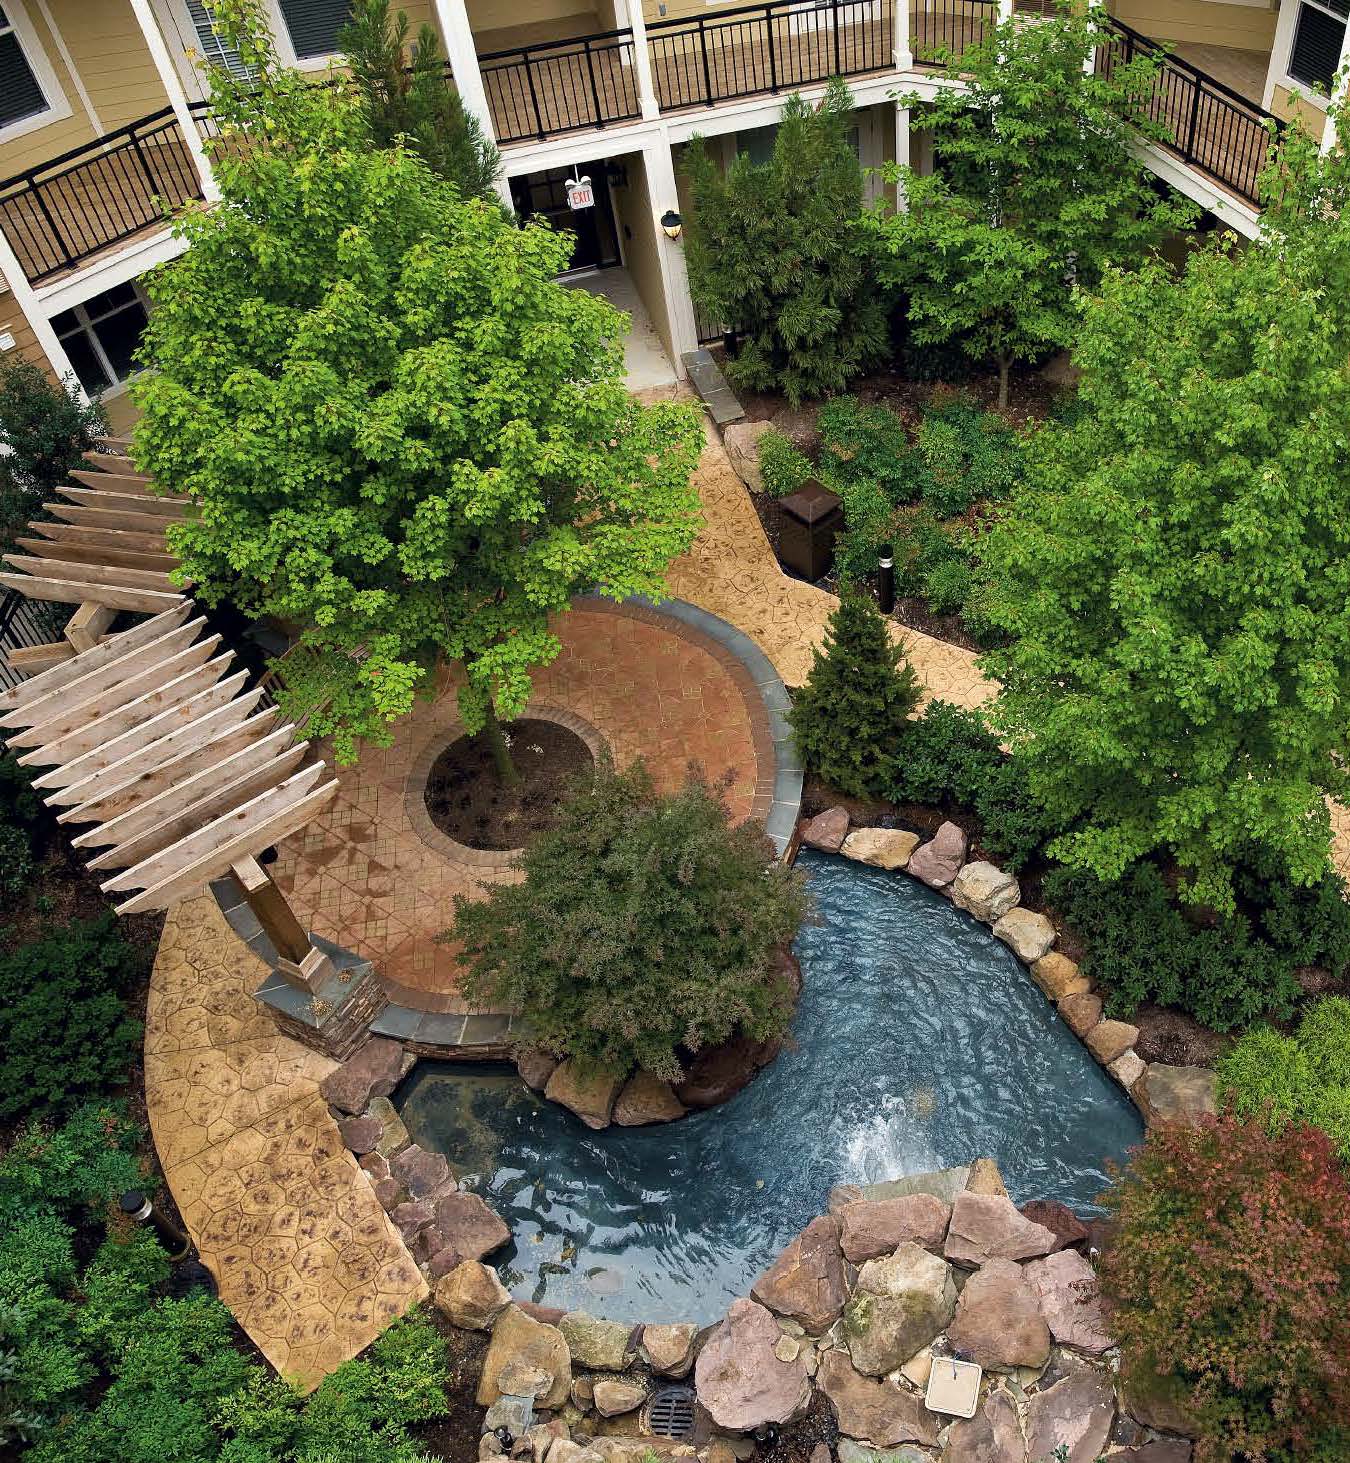 A large courtyard with greenery and concrete stamped pathways.